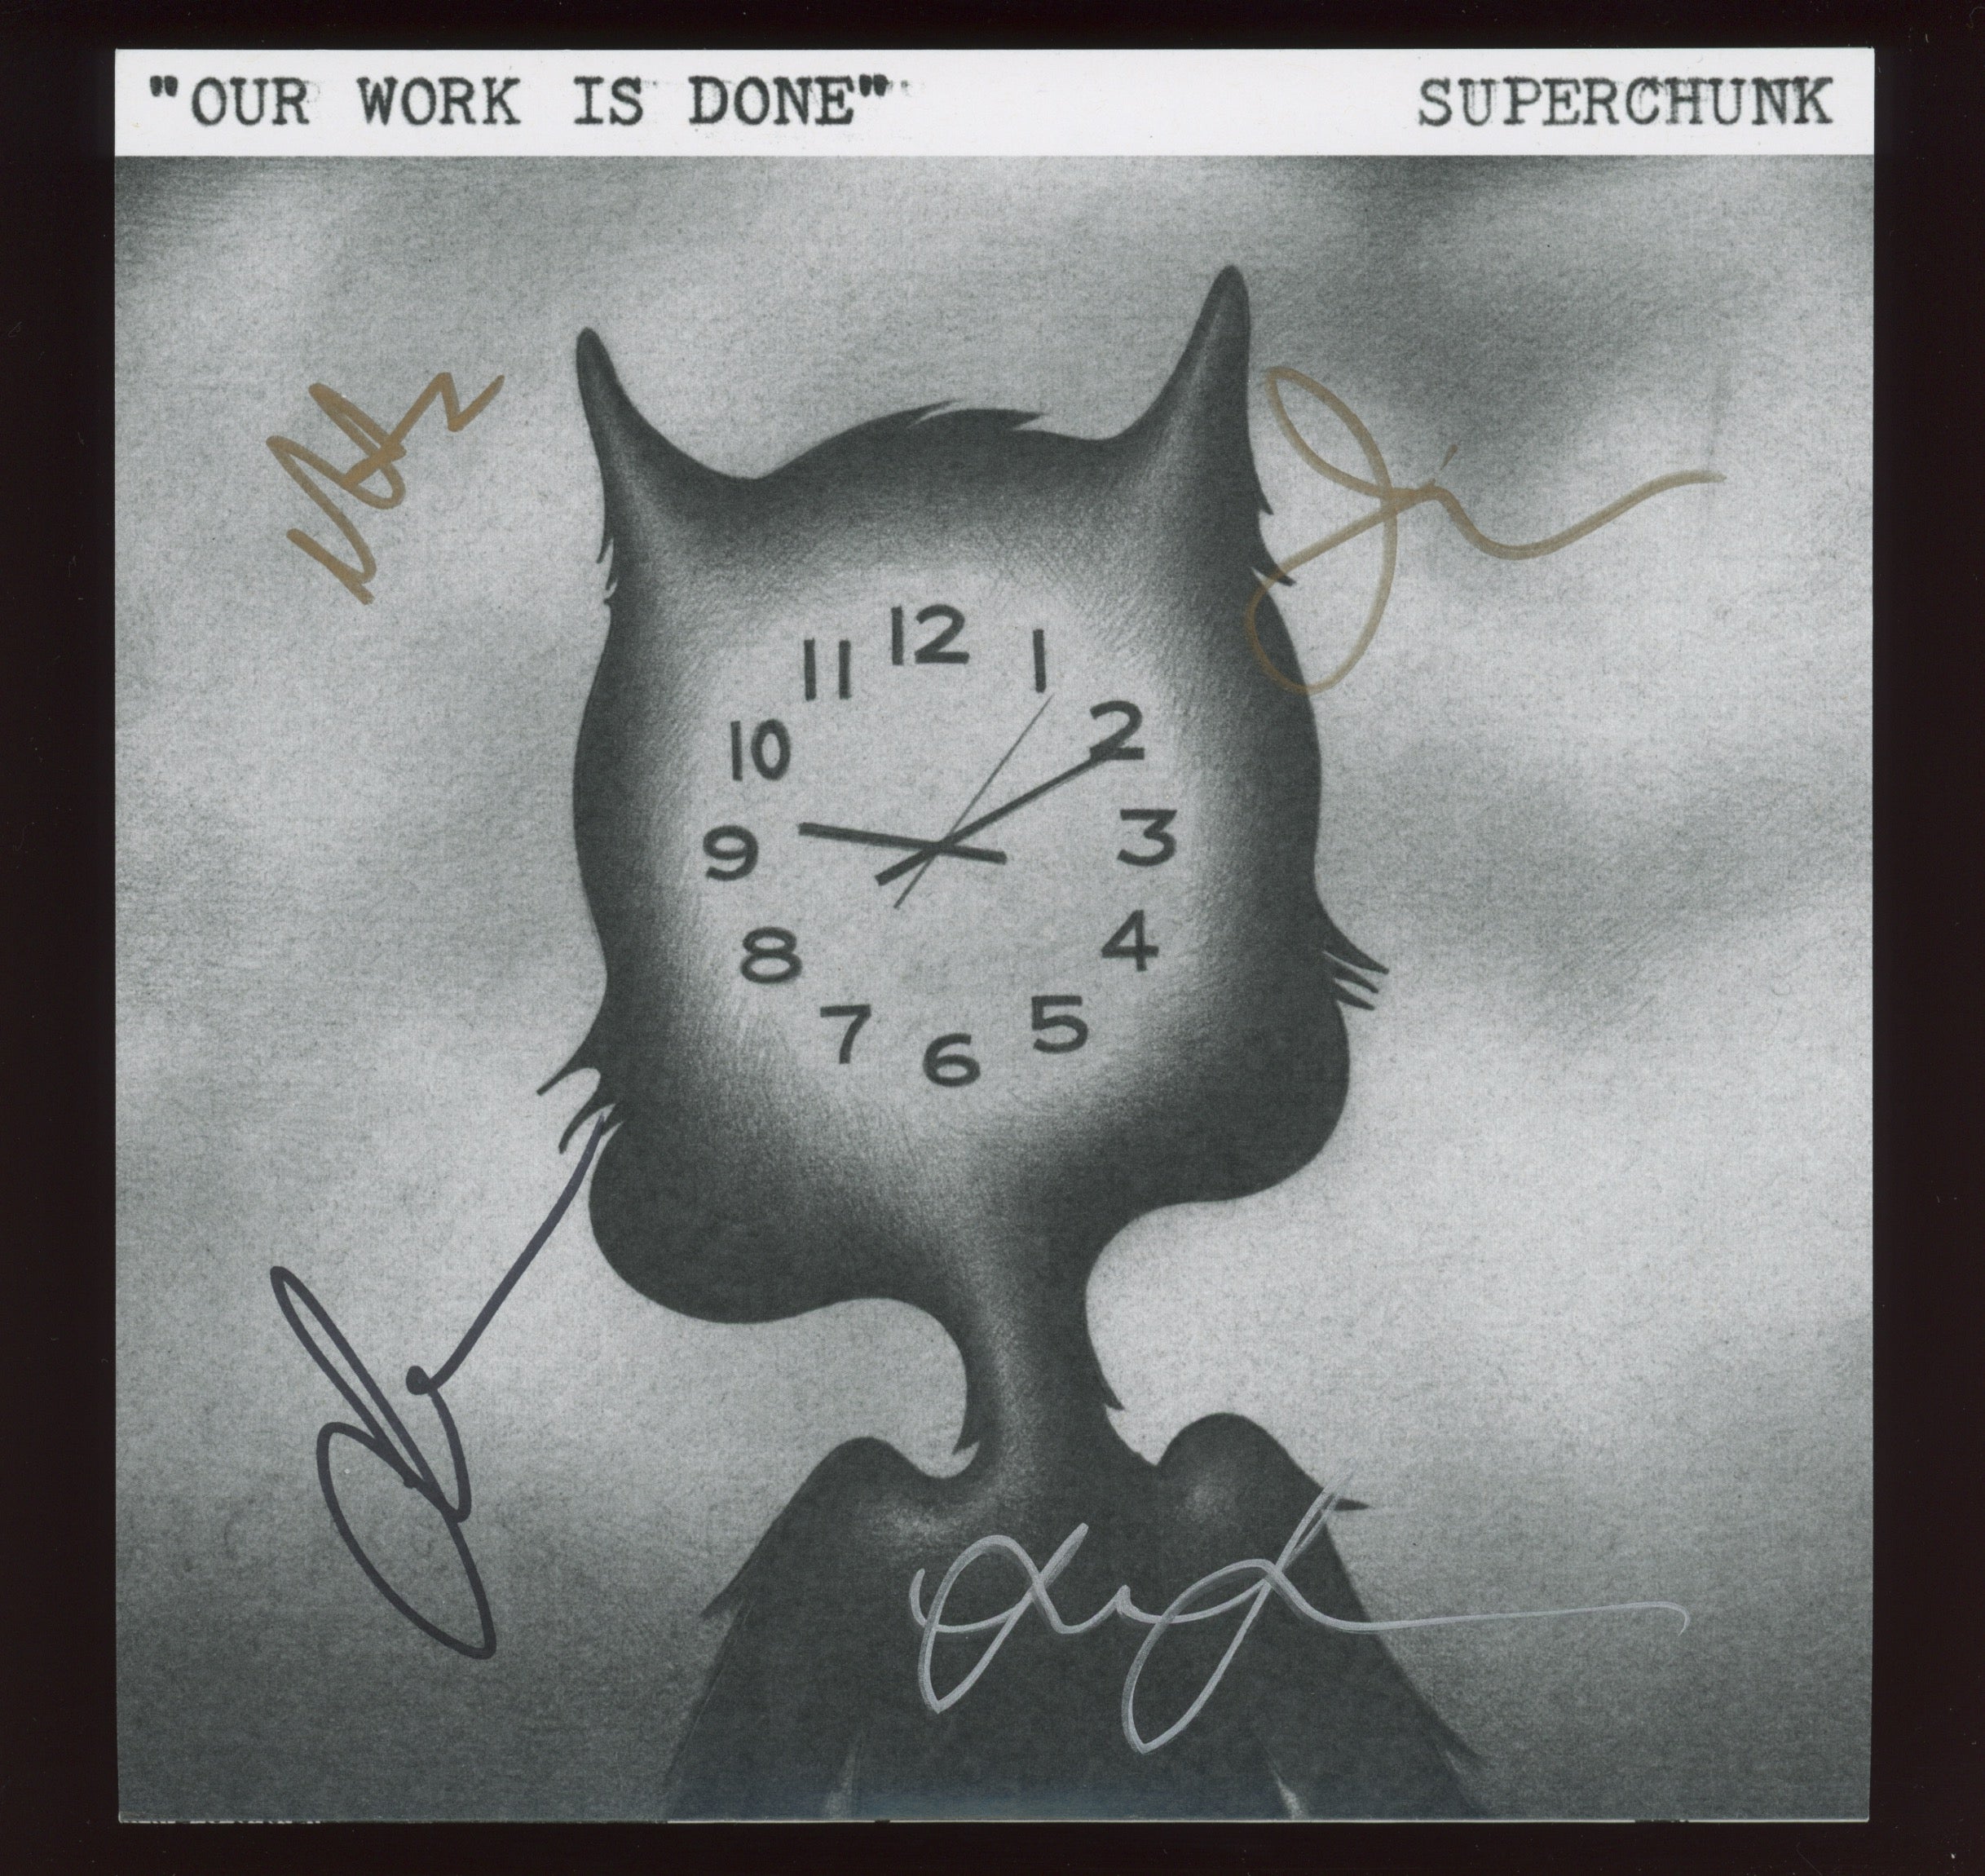 Superchunk - Our Work Is Done b/w Total Eclipse on Merge Ltd Numbered Mint Green Marble Signed